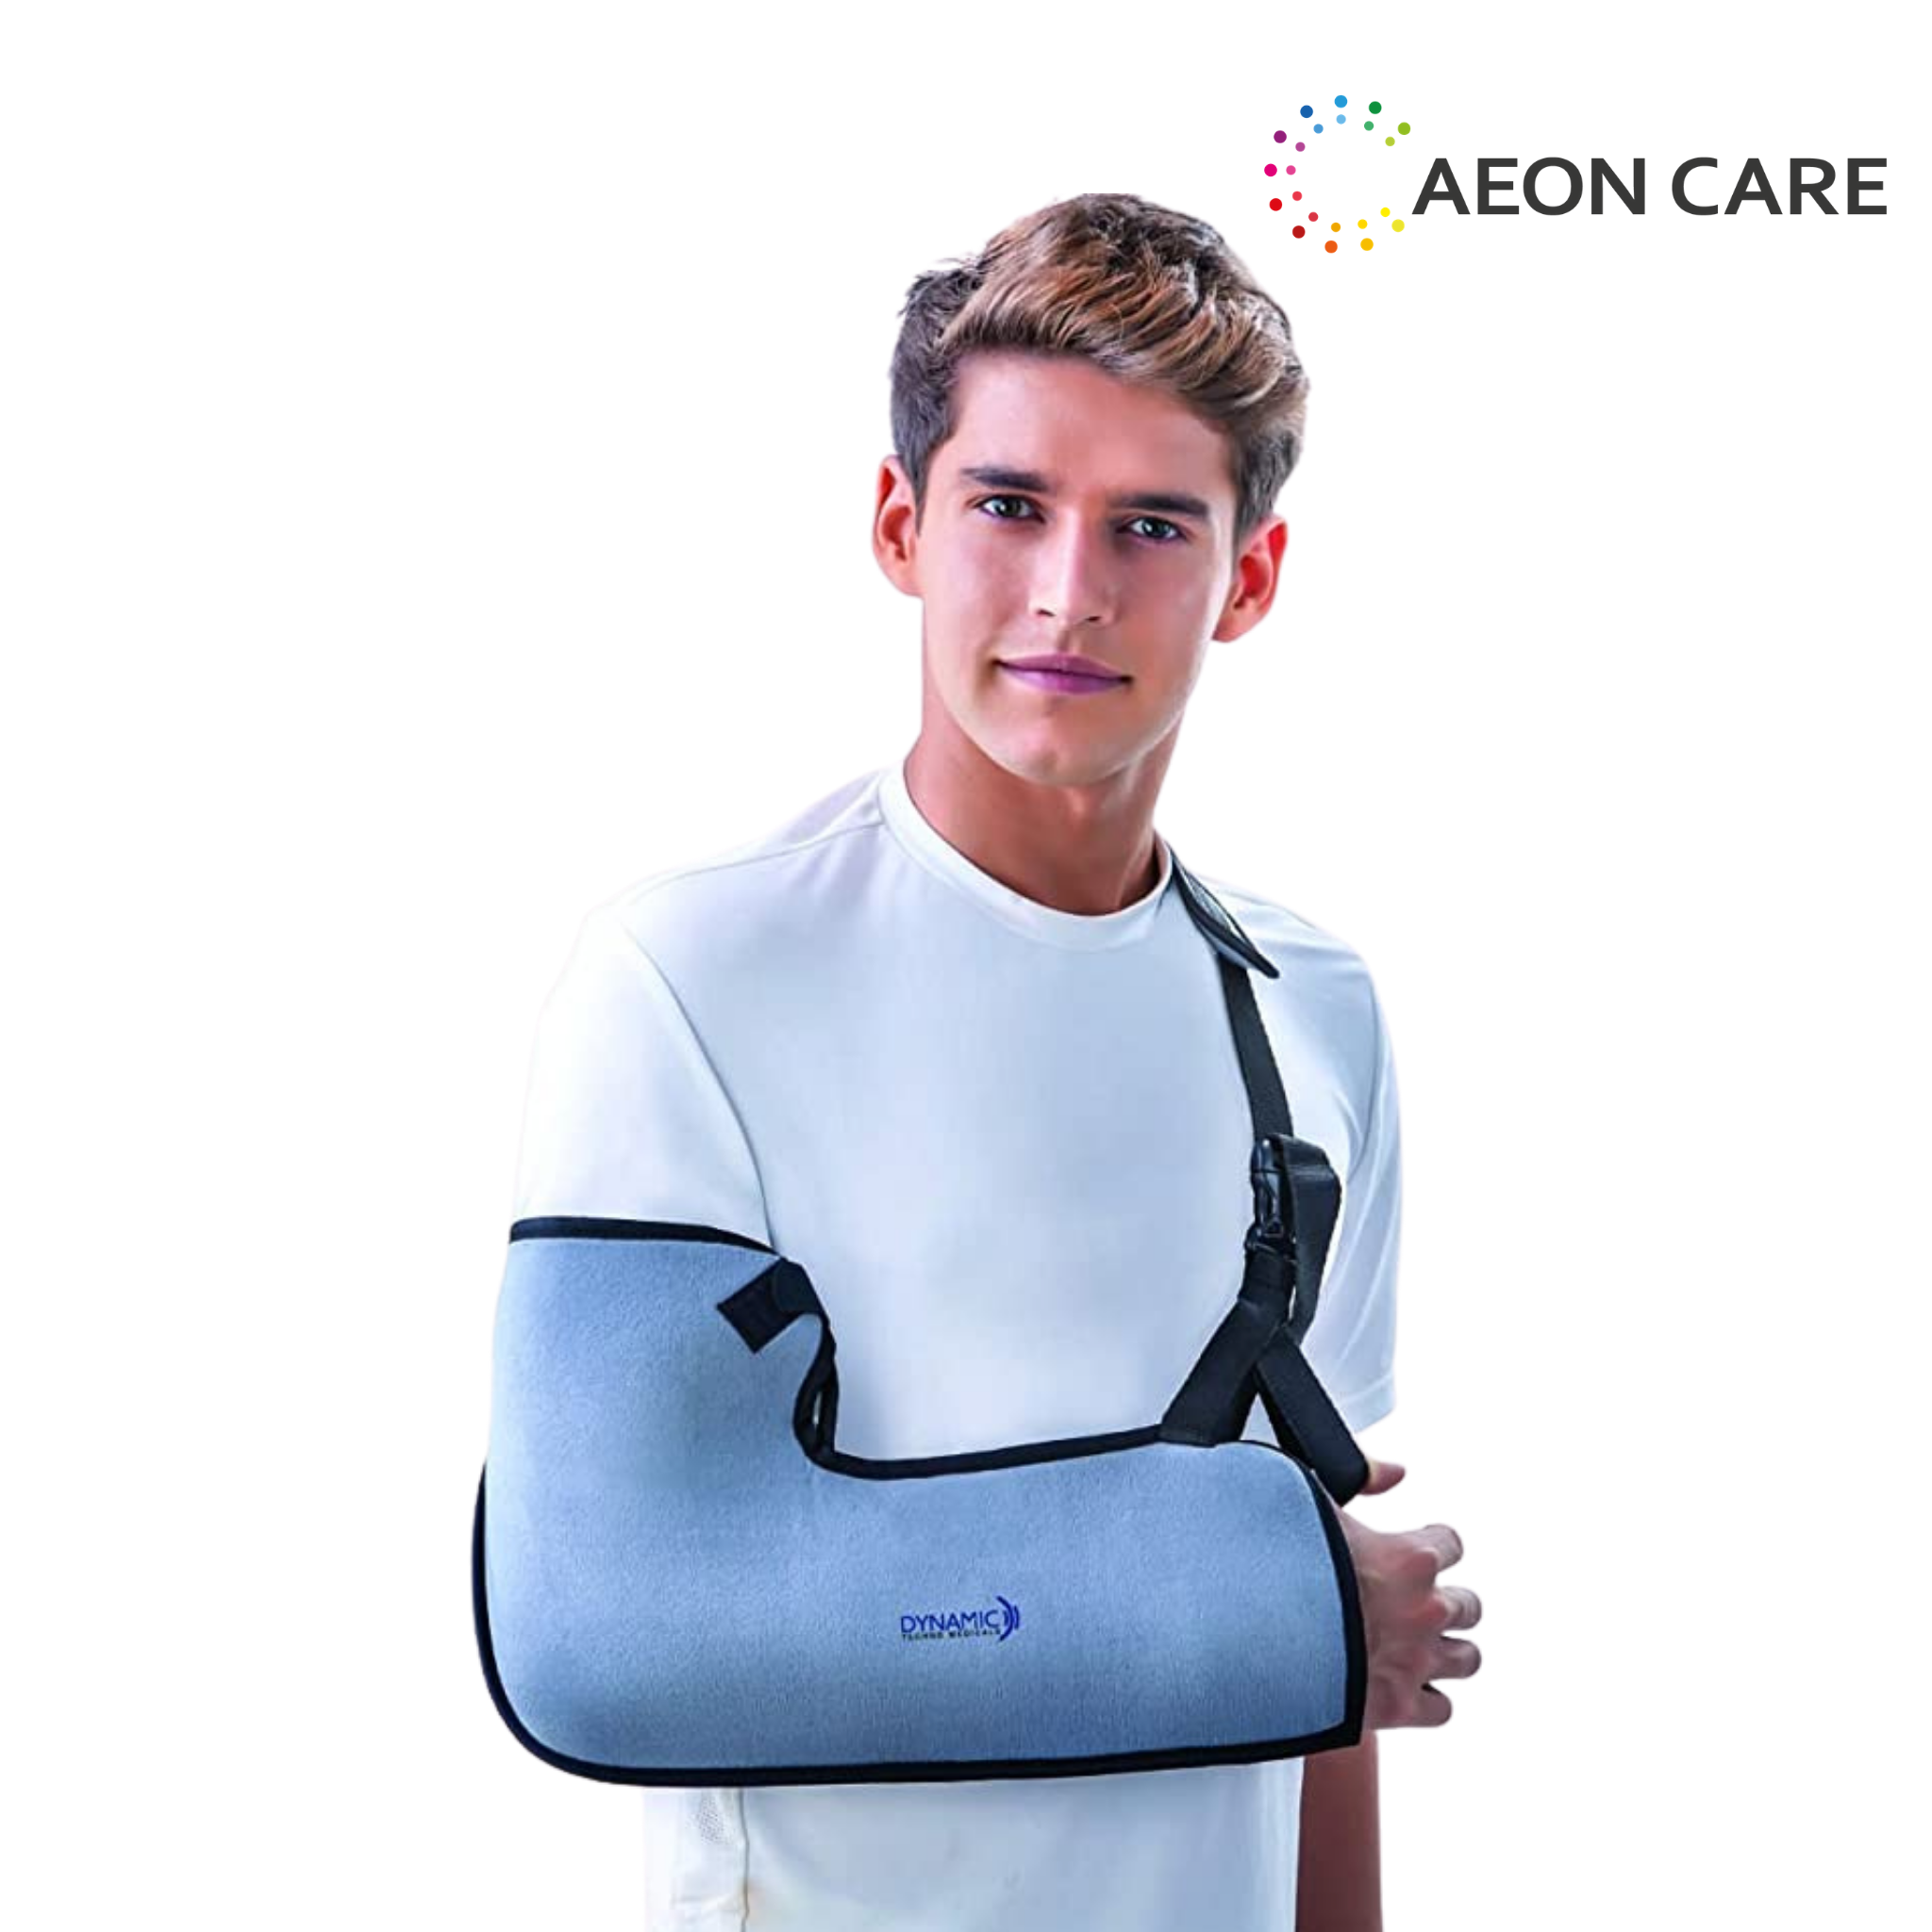 Dyna Arm sling pouch can used for hand support, Arm injuries support, post plaster support